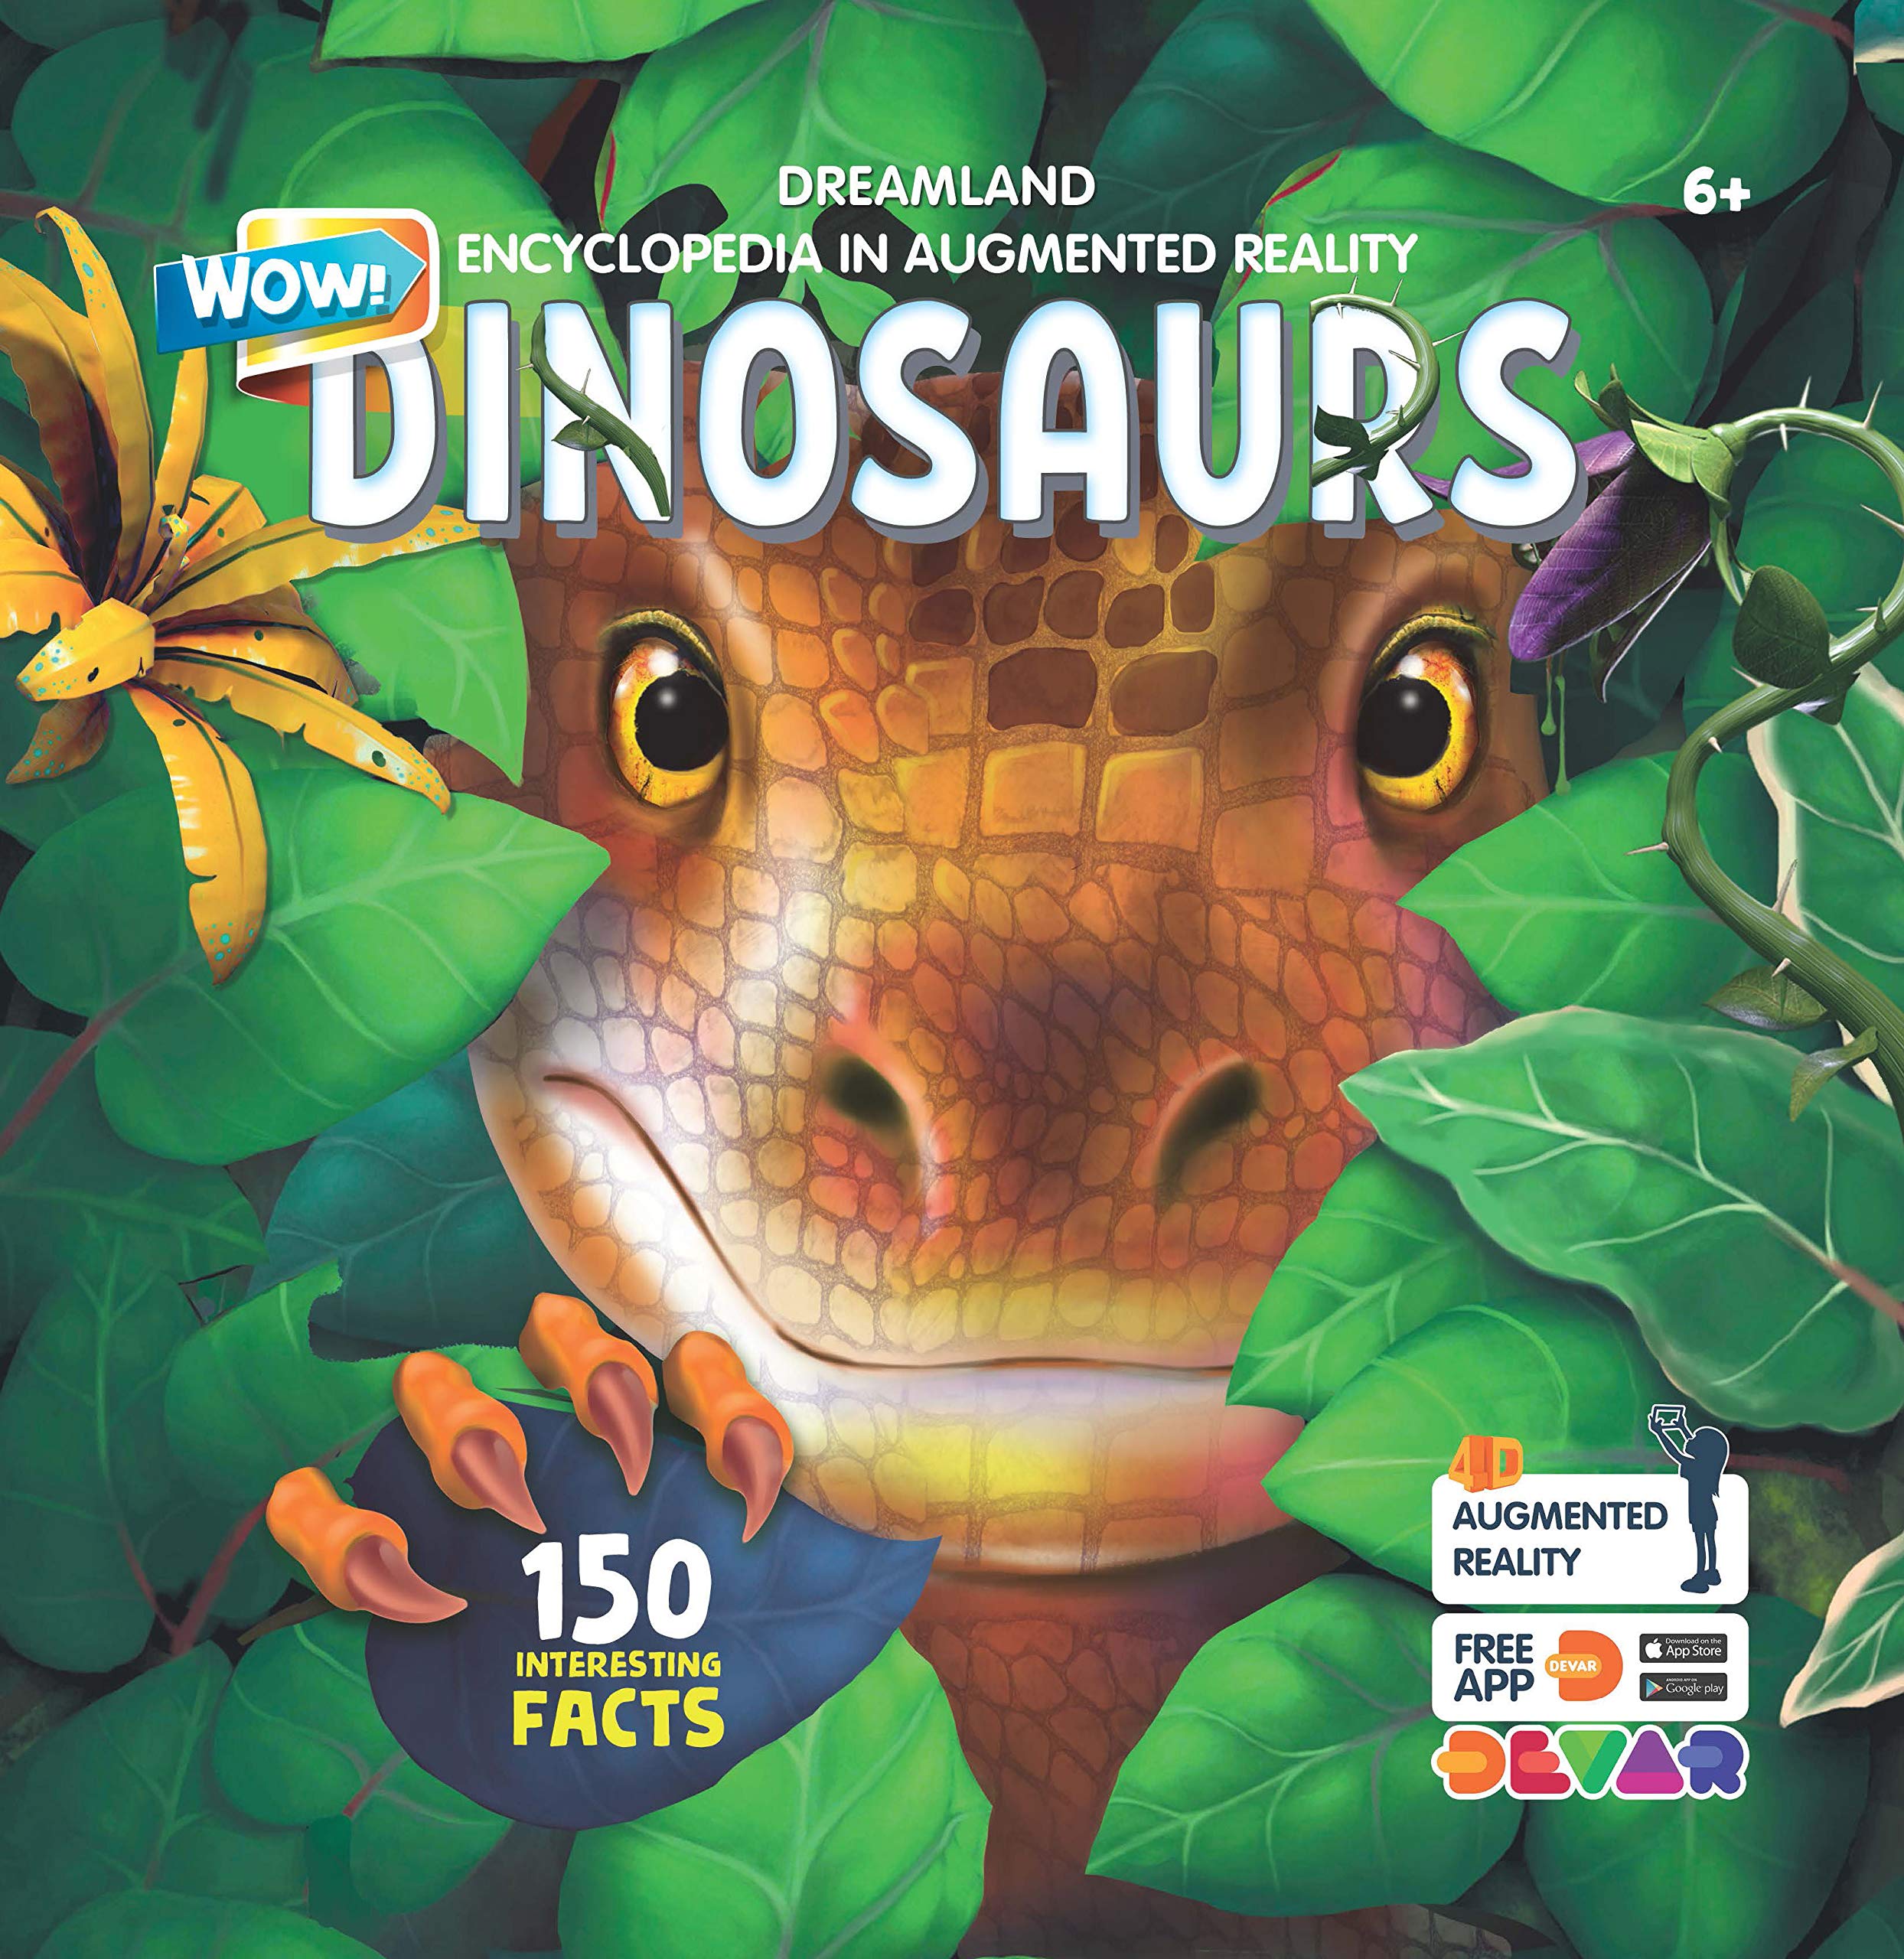 Dinosaurs WOW Children Encyclopedia in Augmented Reality Age 6+ - Free AR App with 150 Interesting Facts